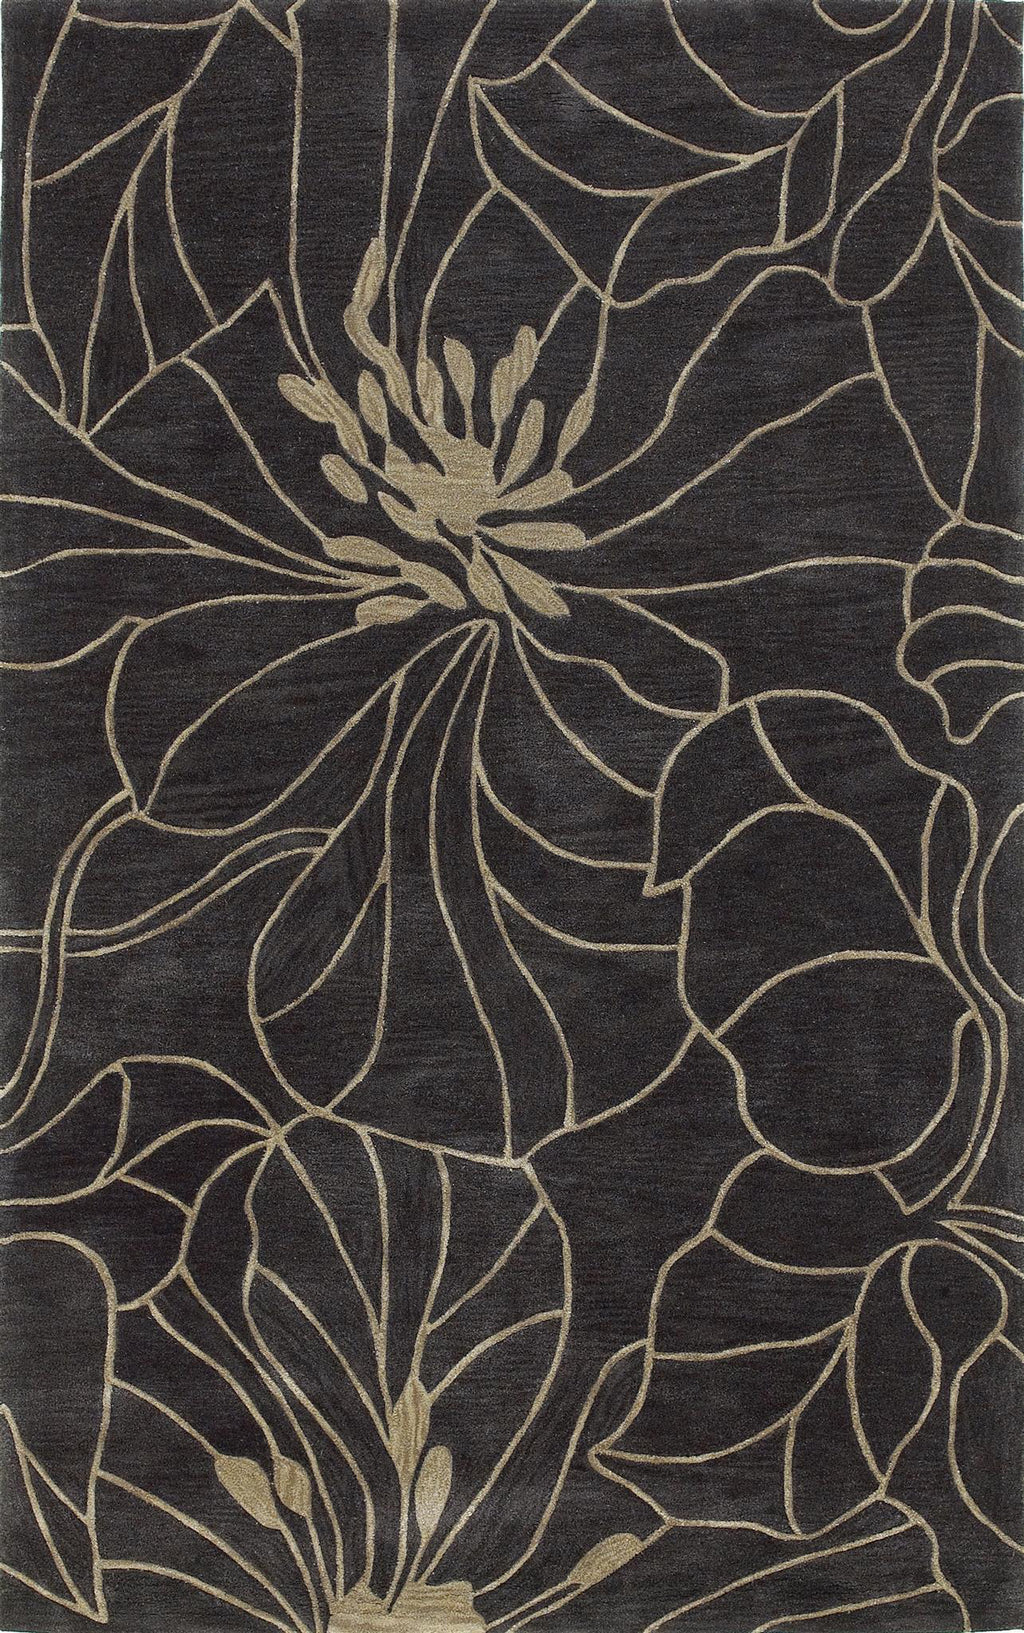 KAS Bali 2816 Charcoal/Taupe Floral Chic Area Rug main image